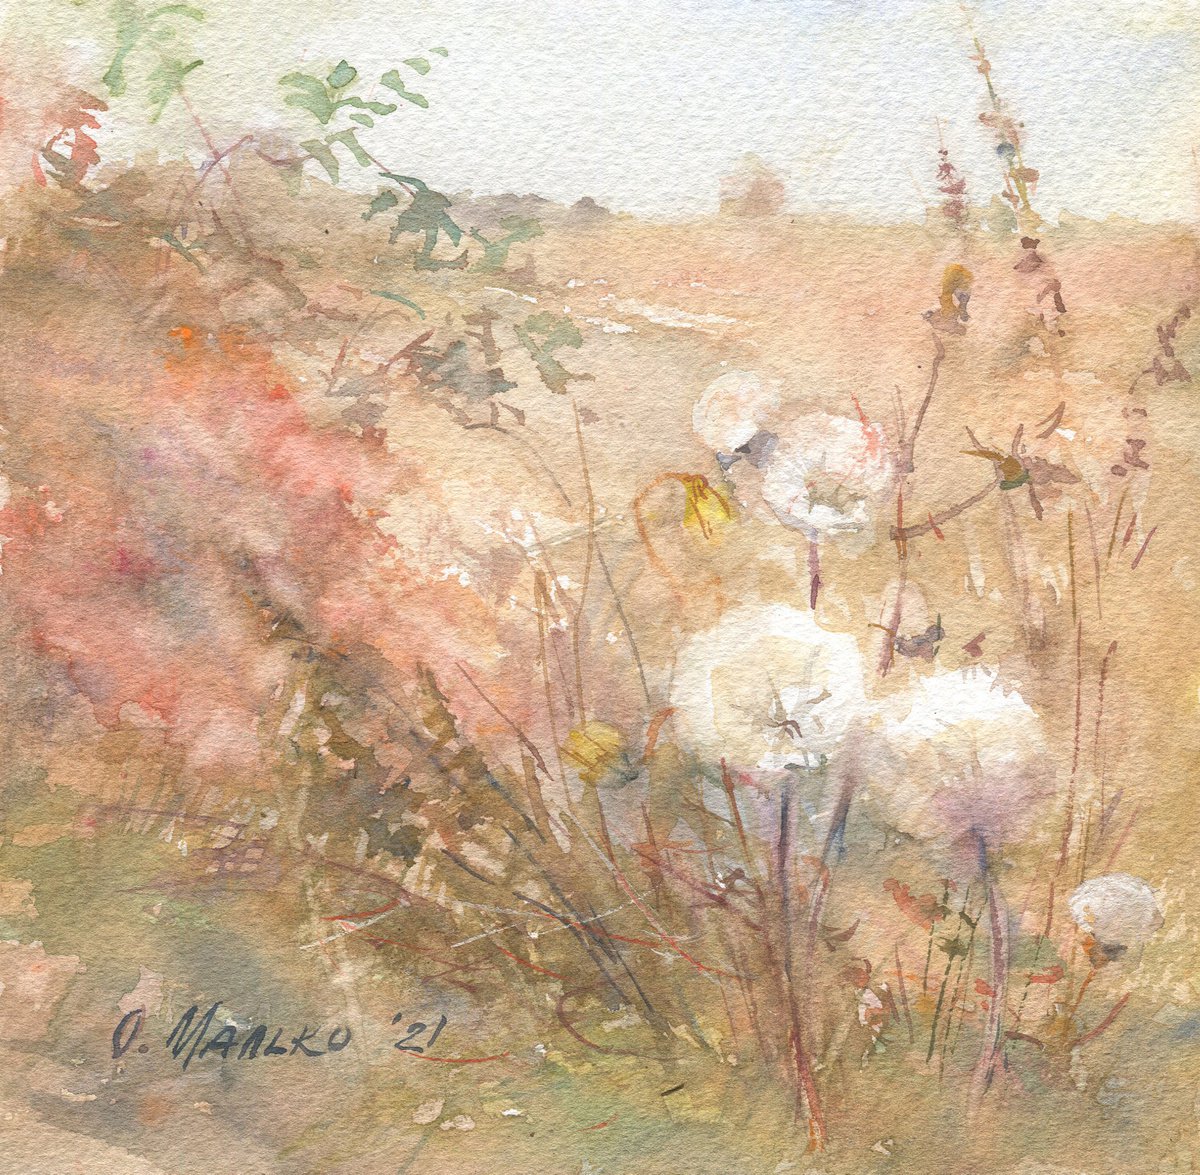 Autumn dandelion puffs / Fall season picture Outdoor watercolor Landscape painting Origina... by Olha Malko